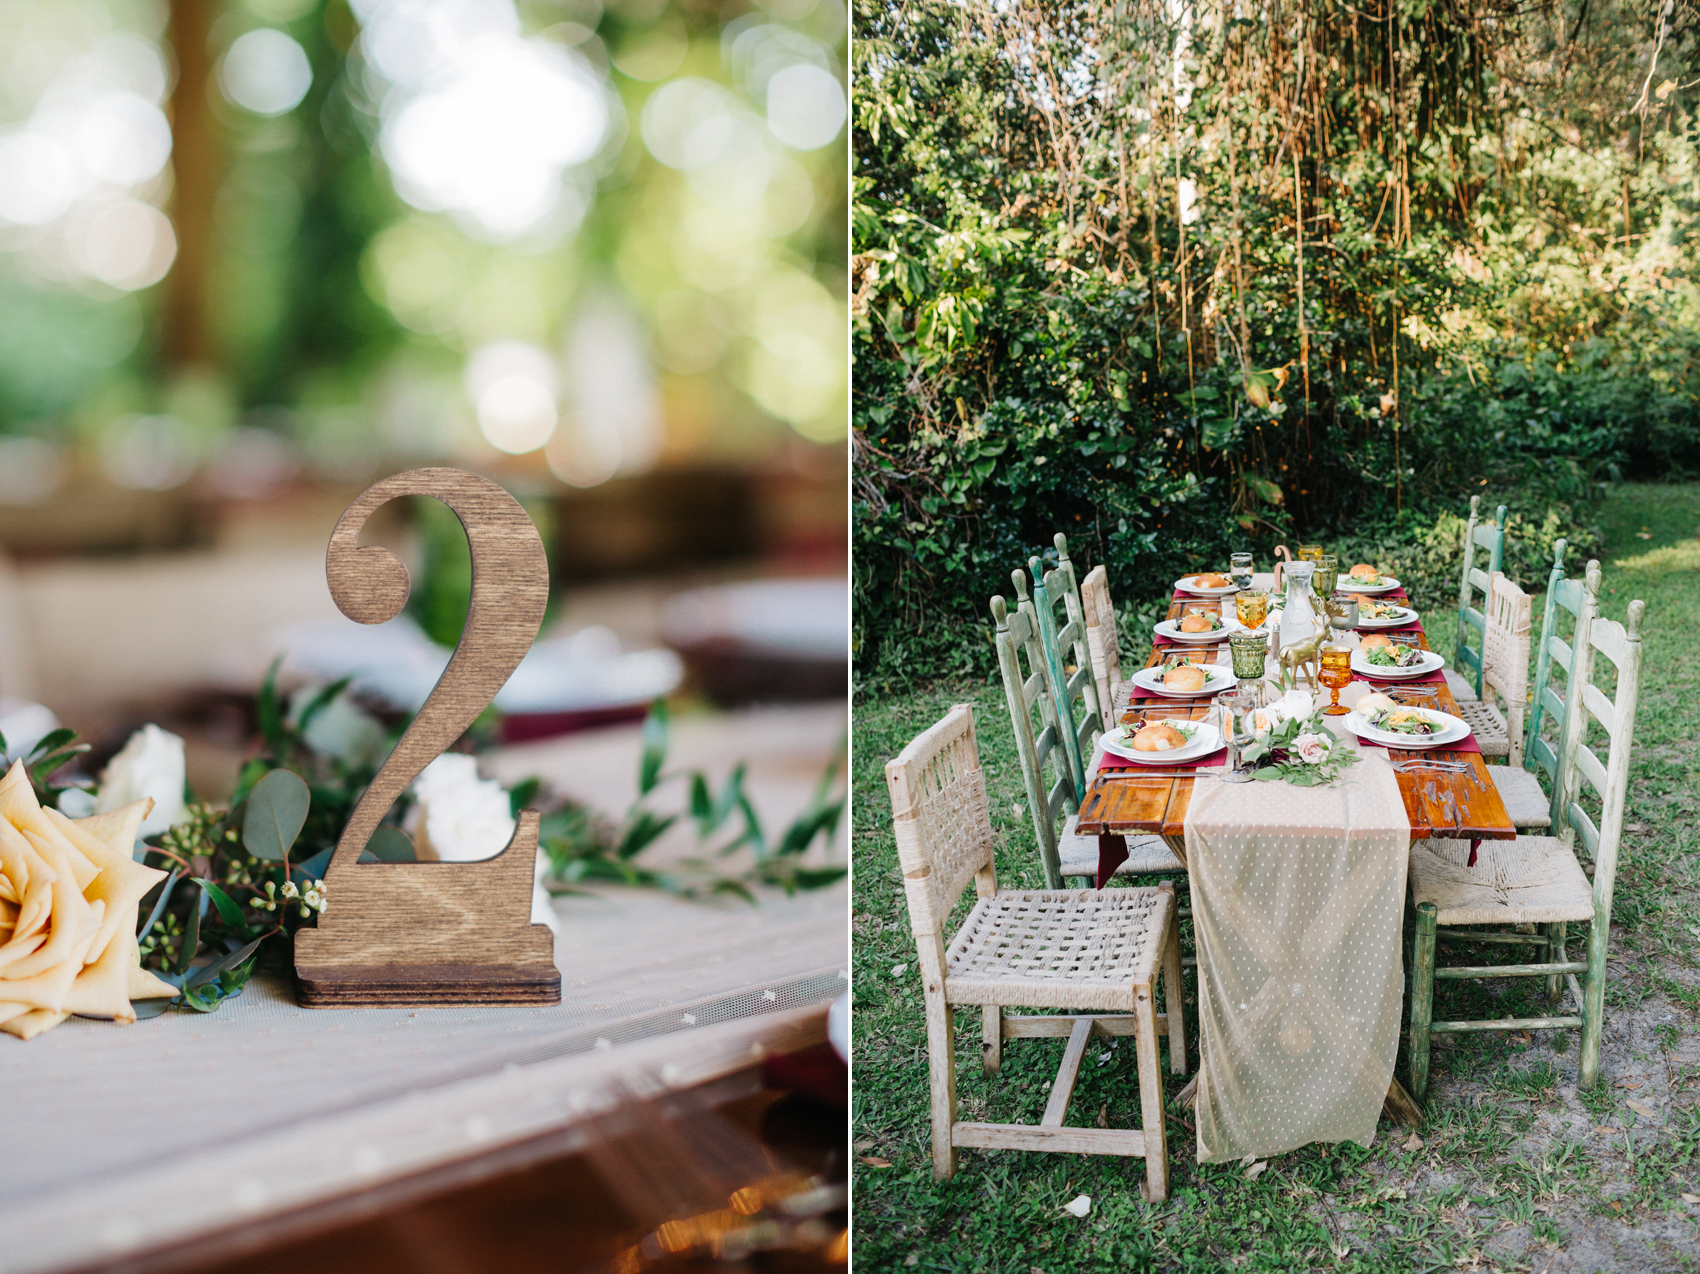 Wood table numbers, mismtached chairs, and wood farm table with mismatched woodland centerpieces by Orlando wedding photographer for outdoor garden wedding